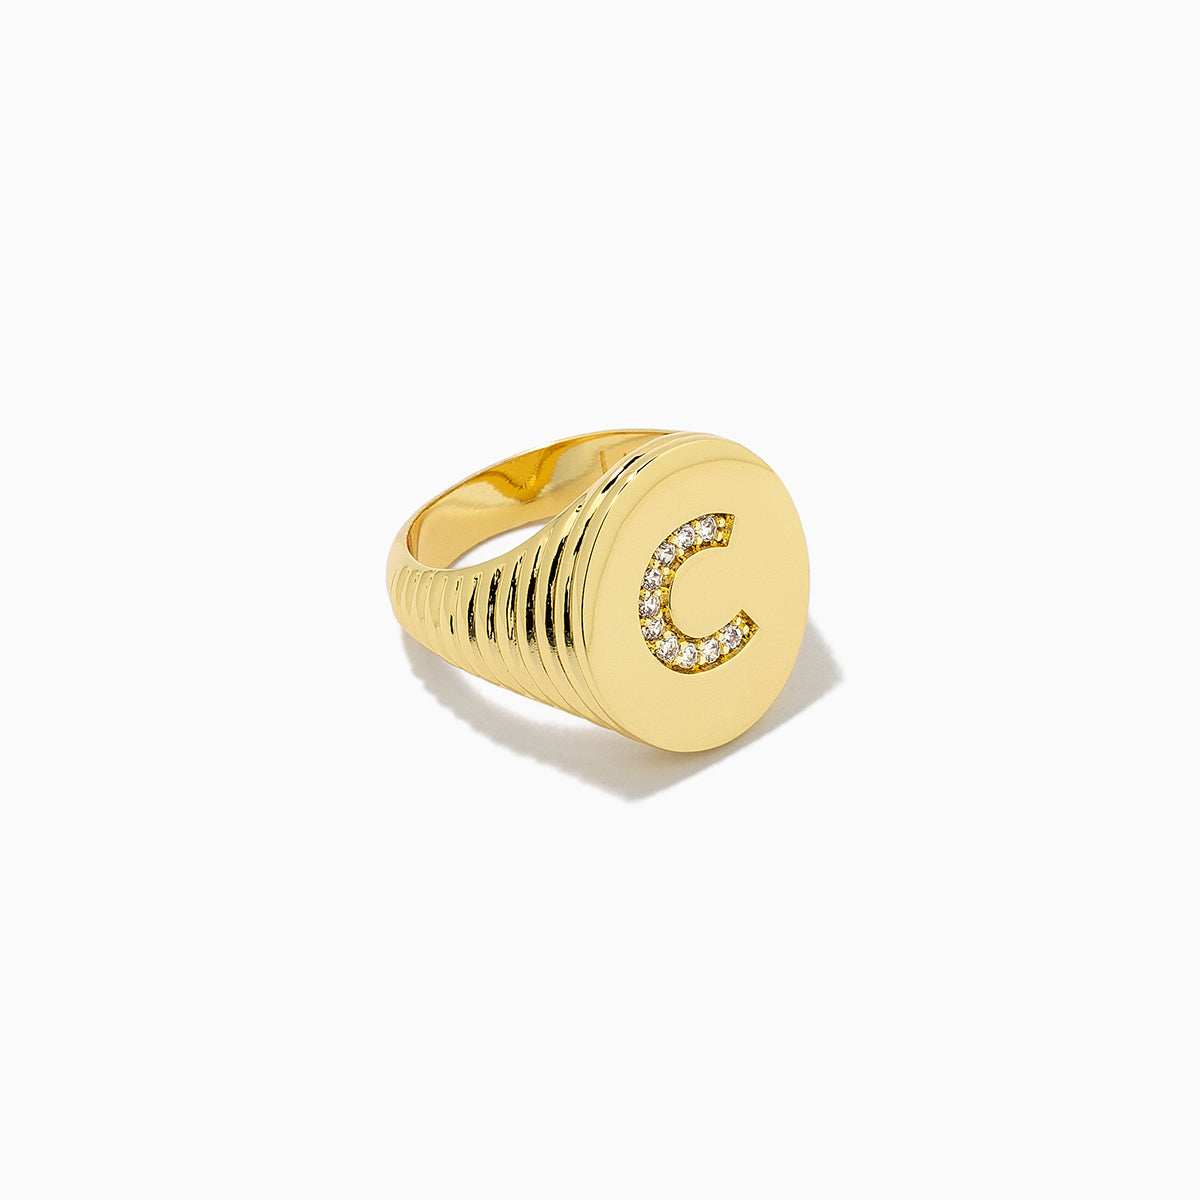 Initial Here Ring | Gold C 6 GoldC 7 Gold C 8 | Product Image | Uncommon James